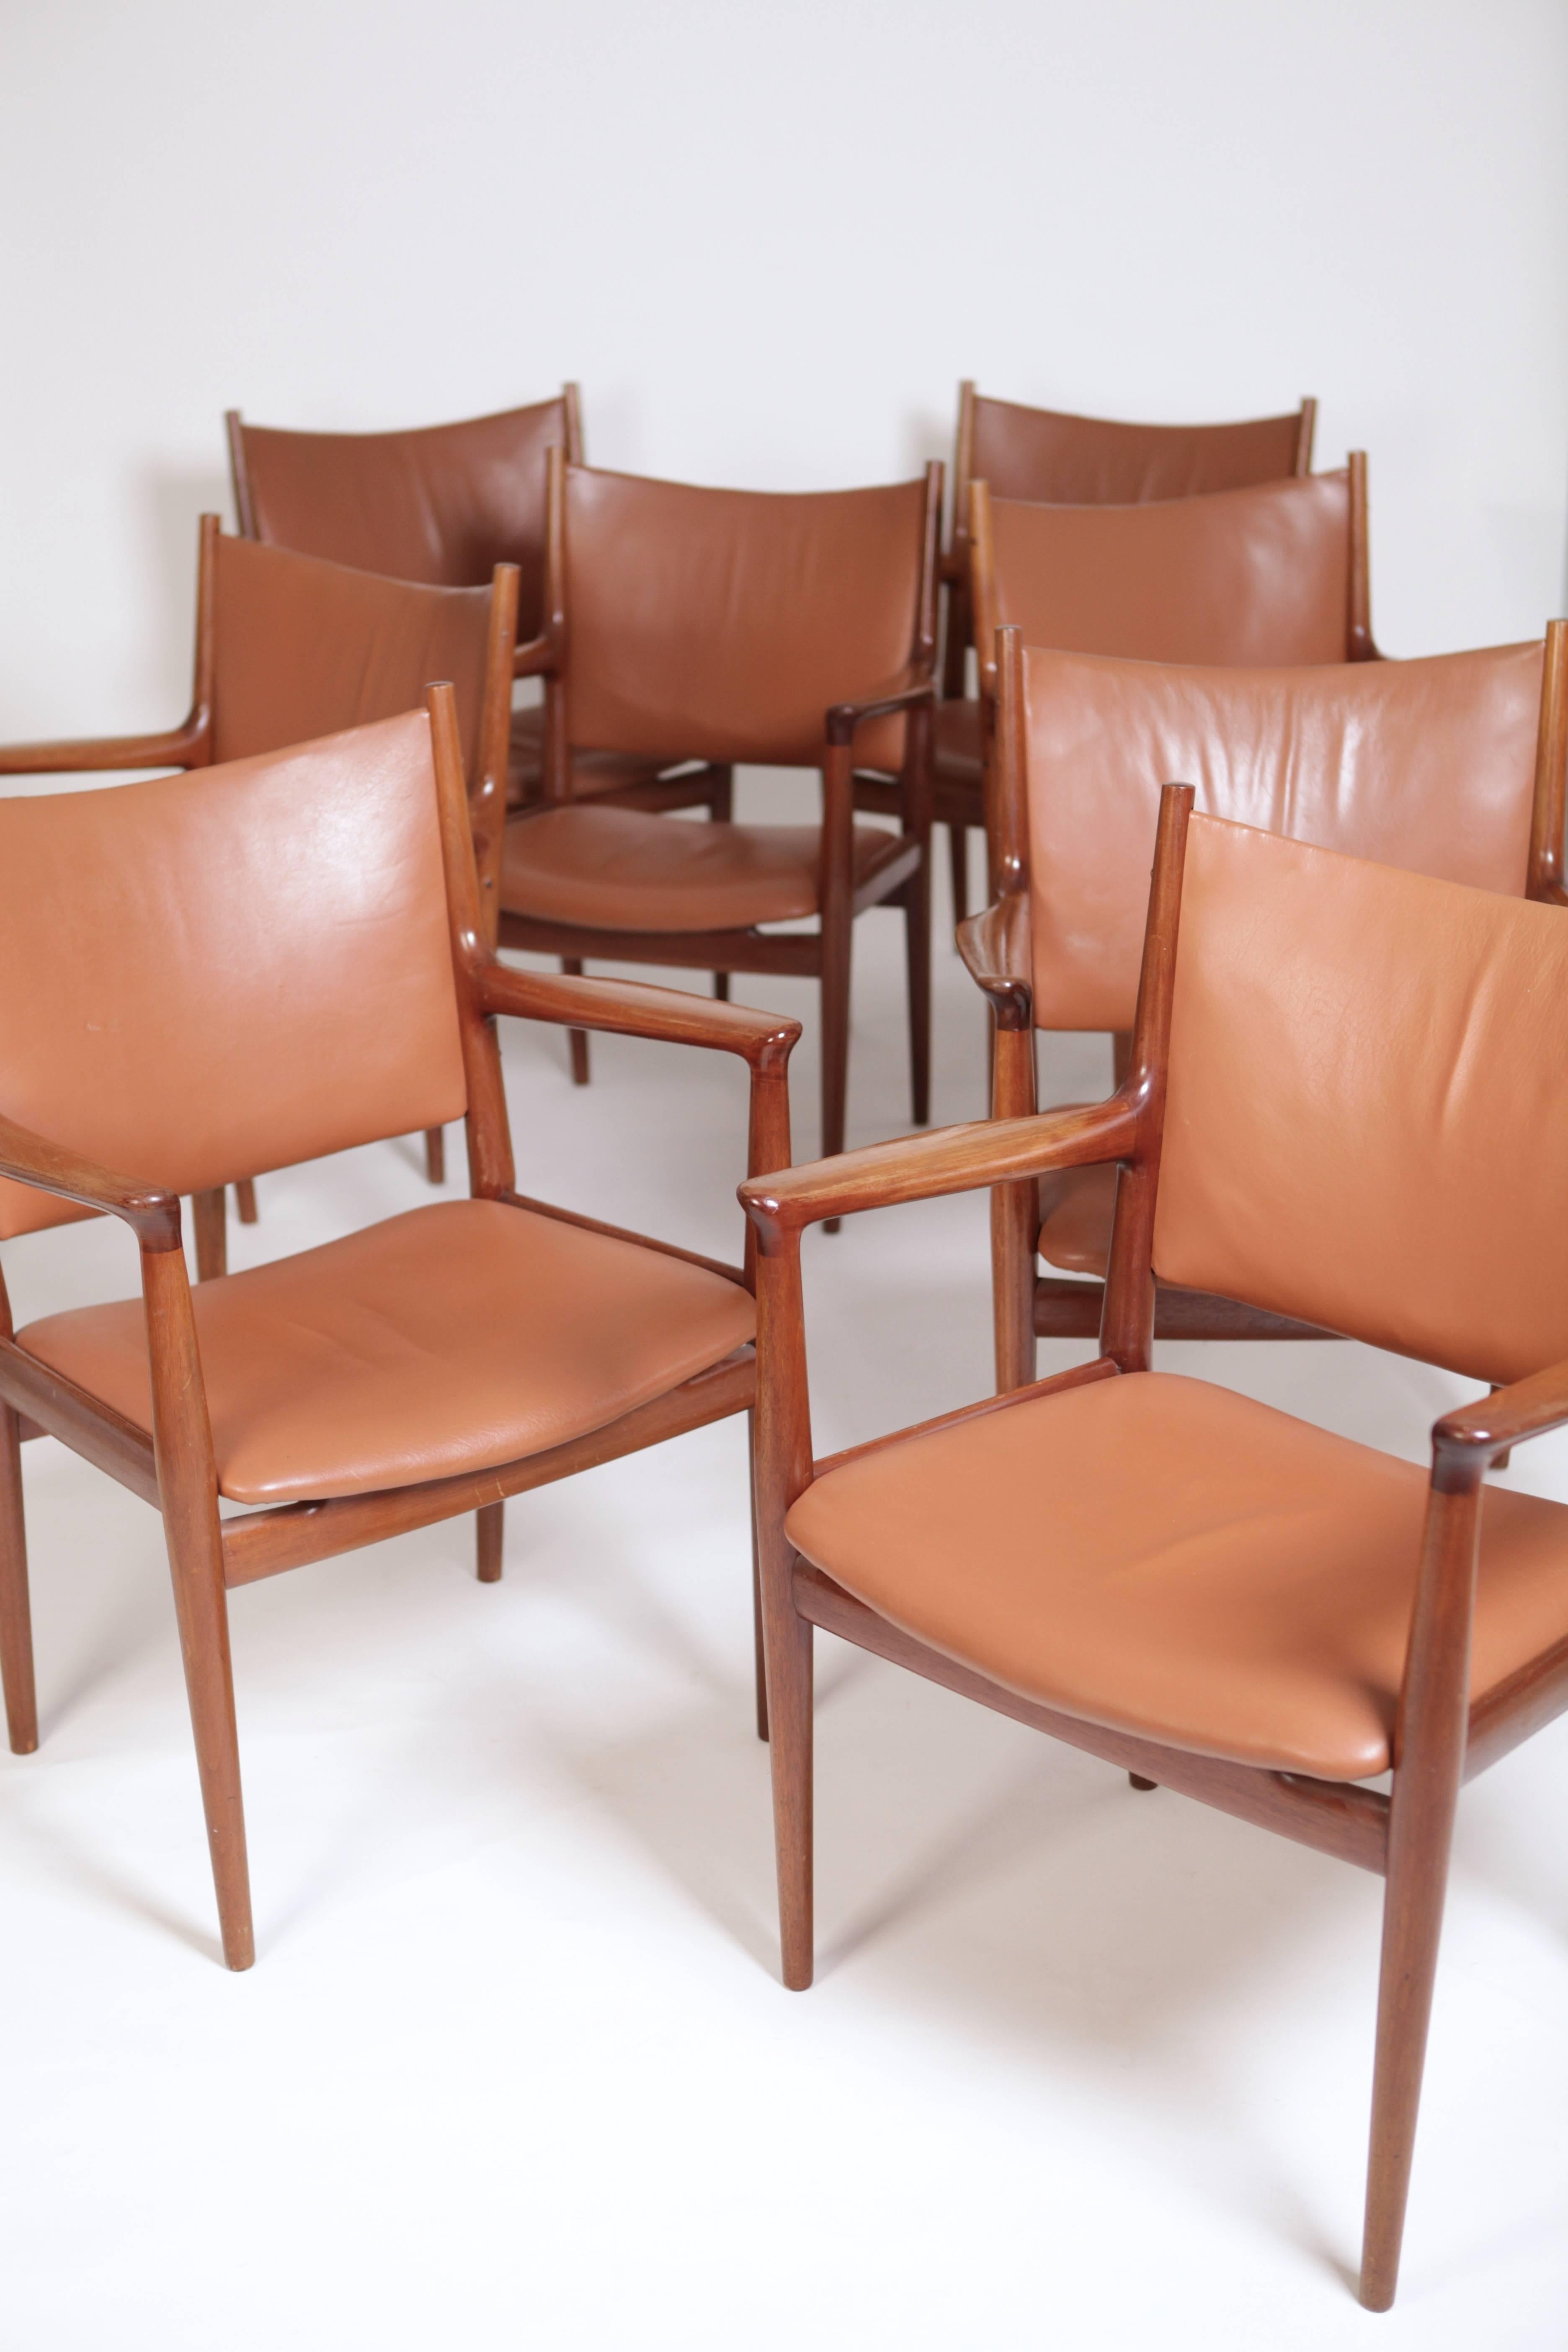 A set of eight Hans Wegner JH513 armchairs in solid mahogany and leather
signed.